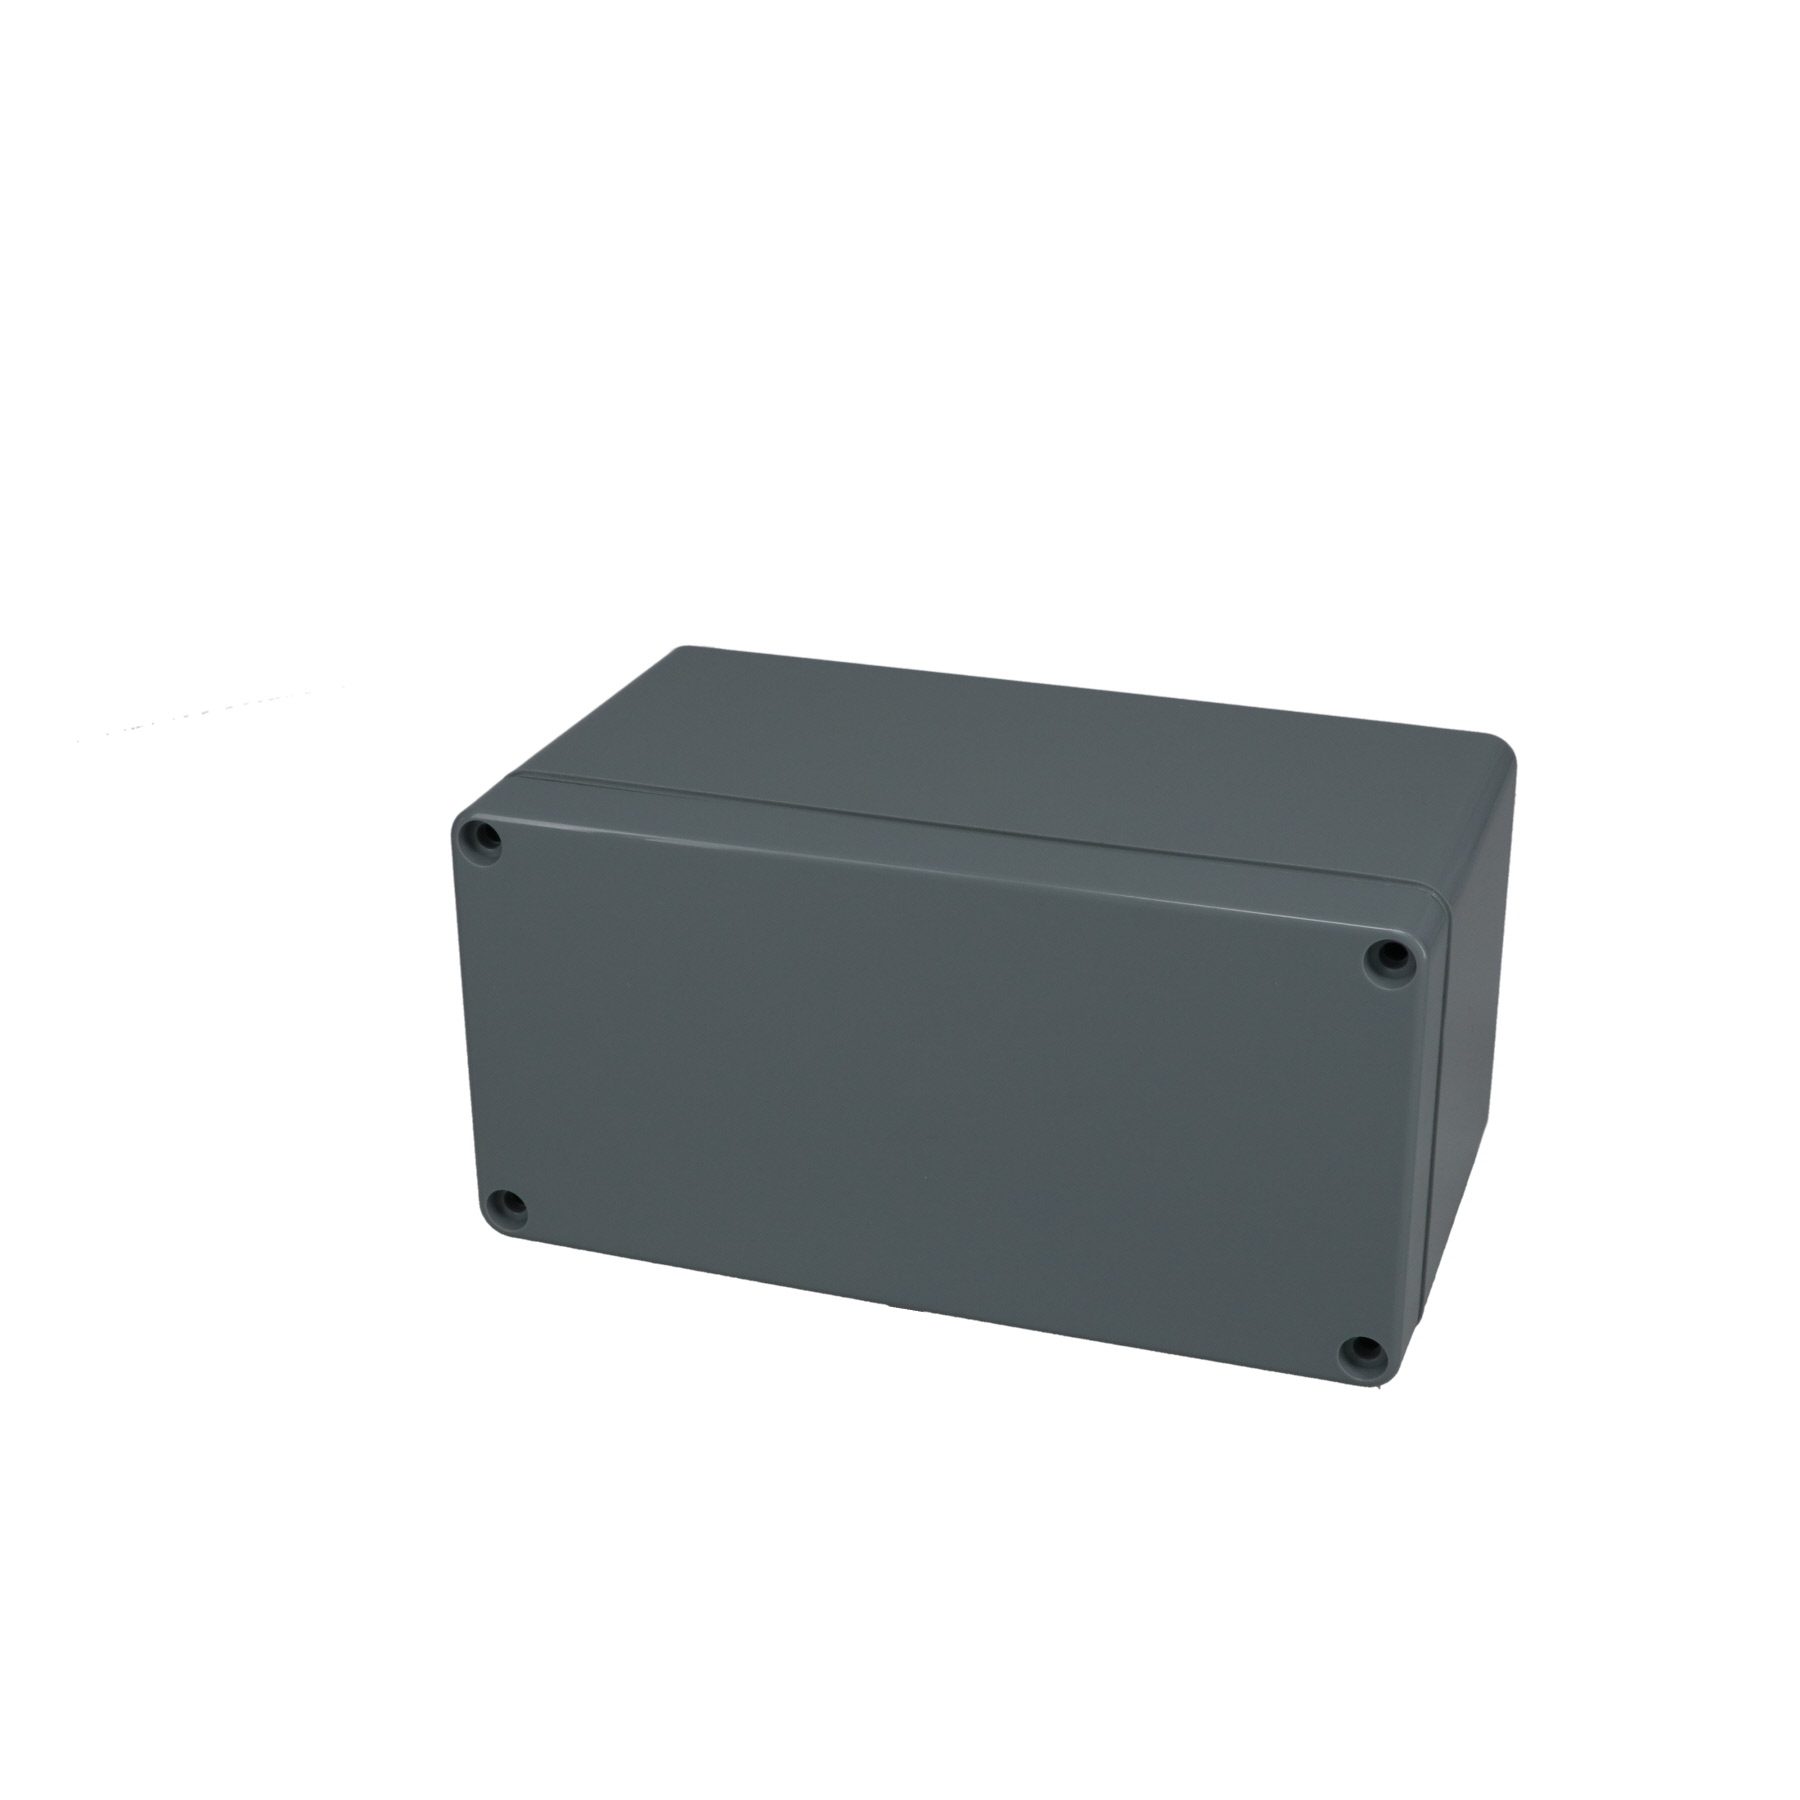 Light Gray Finish 6-19/64 Length x 3-9/64 Width x 2-5/32 Height 6-19/64 Length x 3-9/64 Width x 2-5/32 Height BUD Industries PN-1332-C Polycarbonate NEMA 4x Box with Clear Cover 